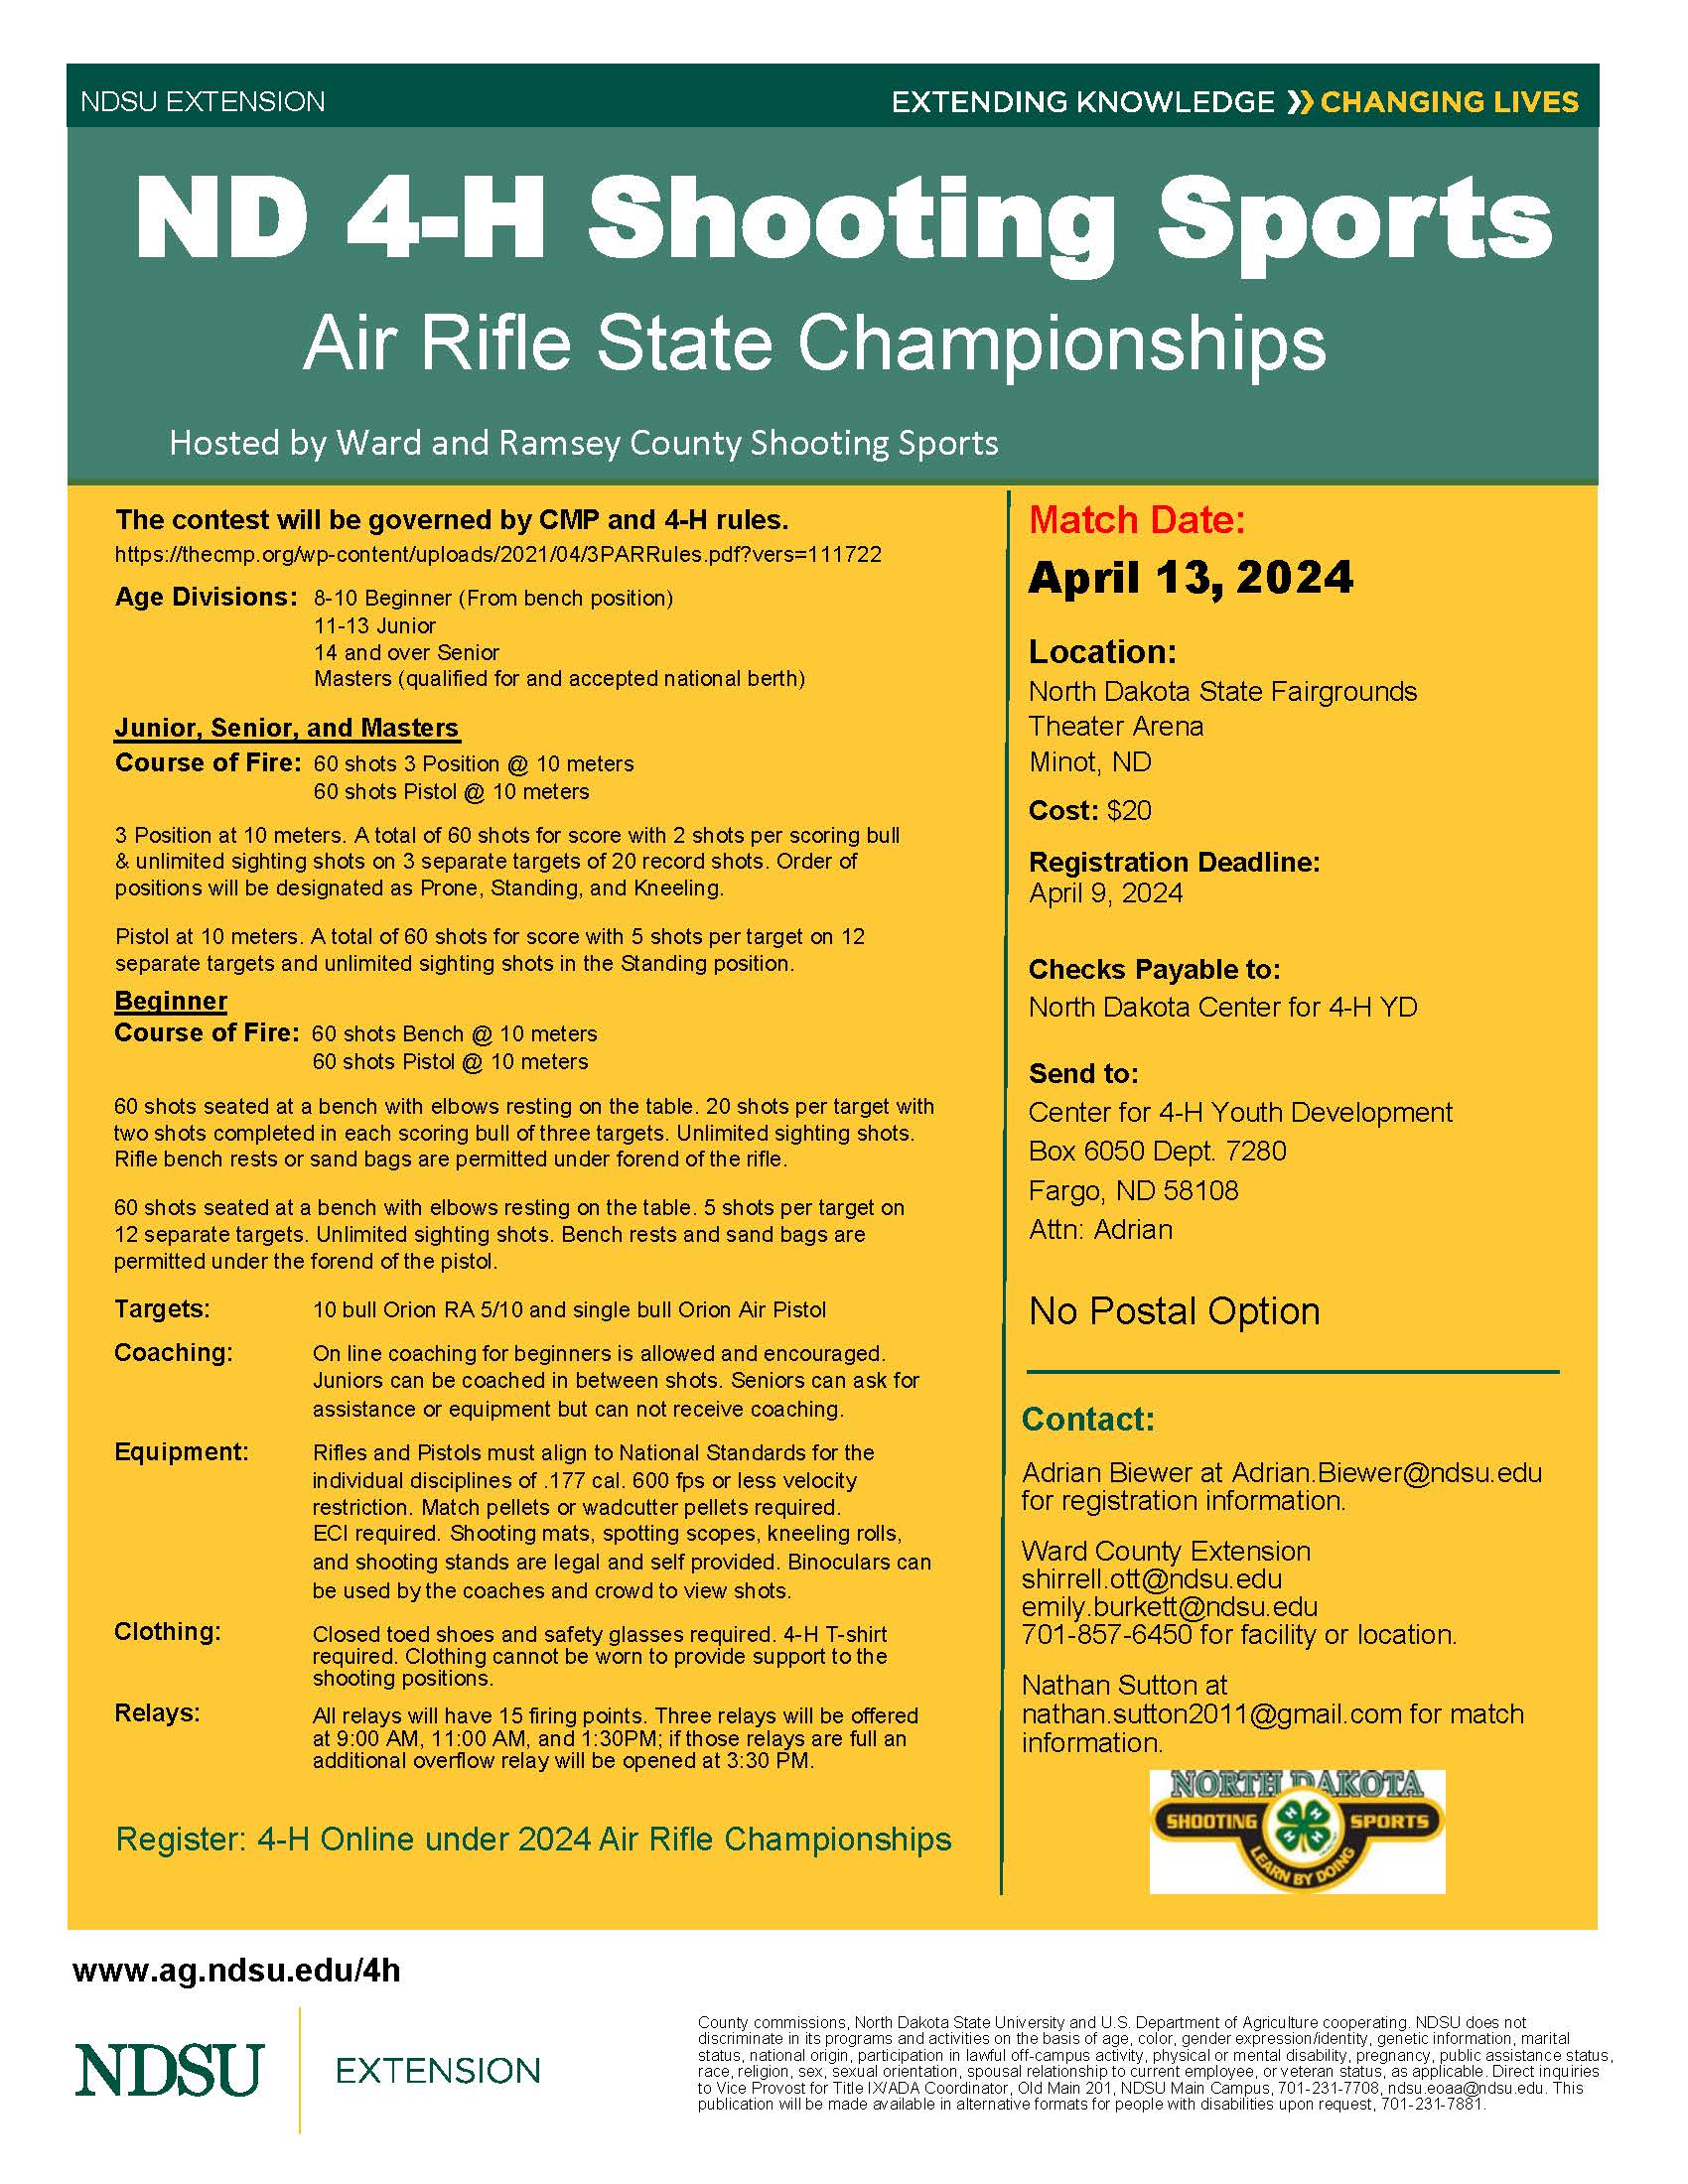 Air Rifle State Championships